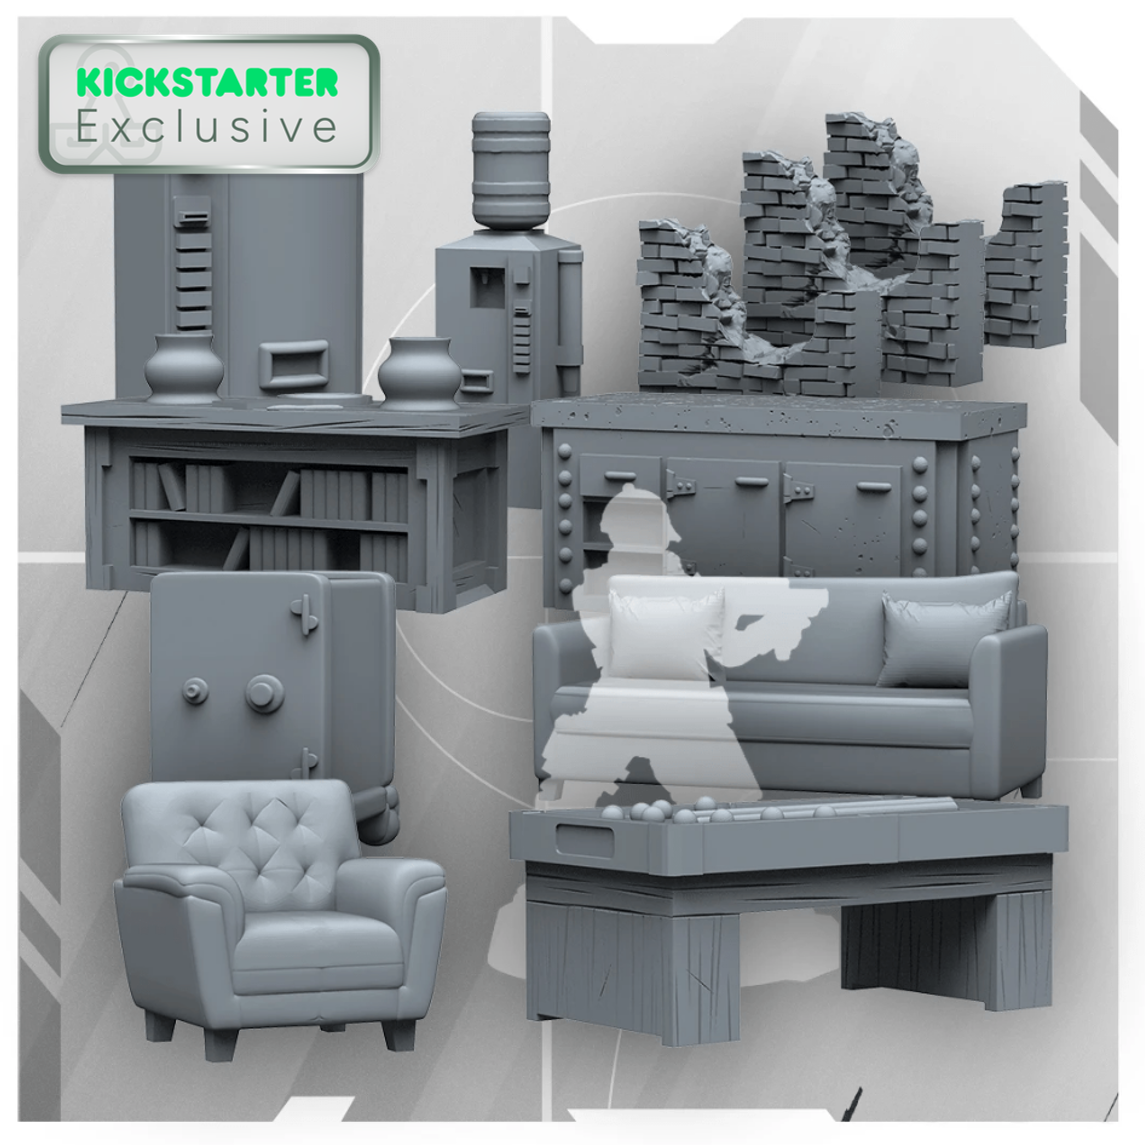 Kickstarter Exclusive 3D Scenery Set from 6: siege the board game, operator scale